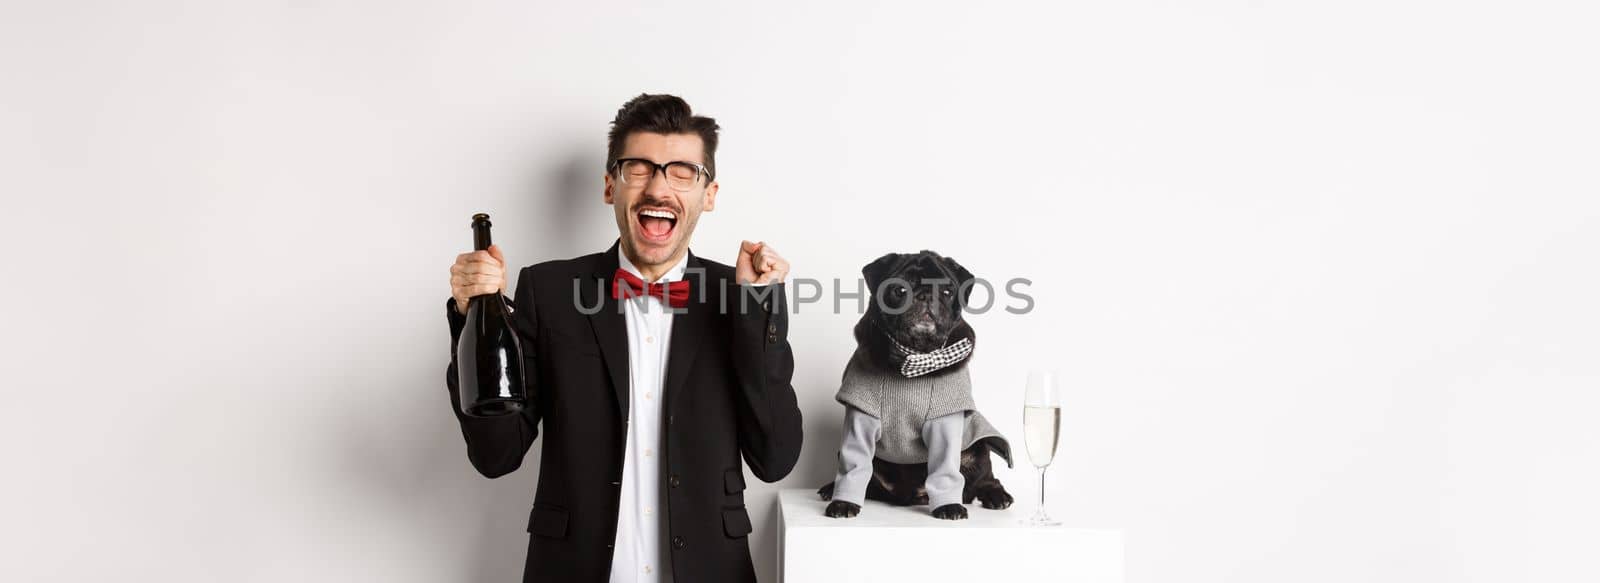 Pets, winter holidays and New Year concept. Happy young man celebrating Christmas with cute black dog wearing party costume, holding bottle champagne, white background.